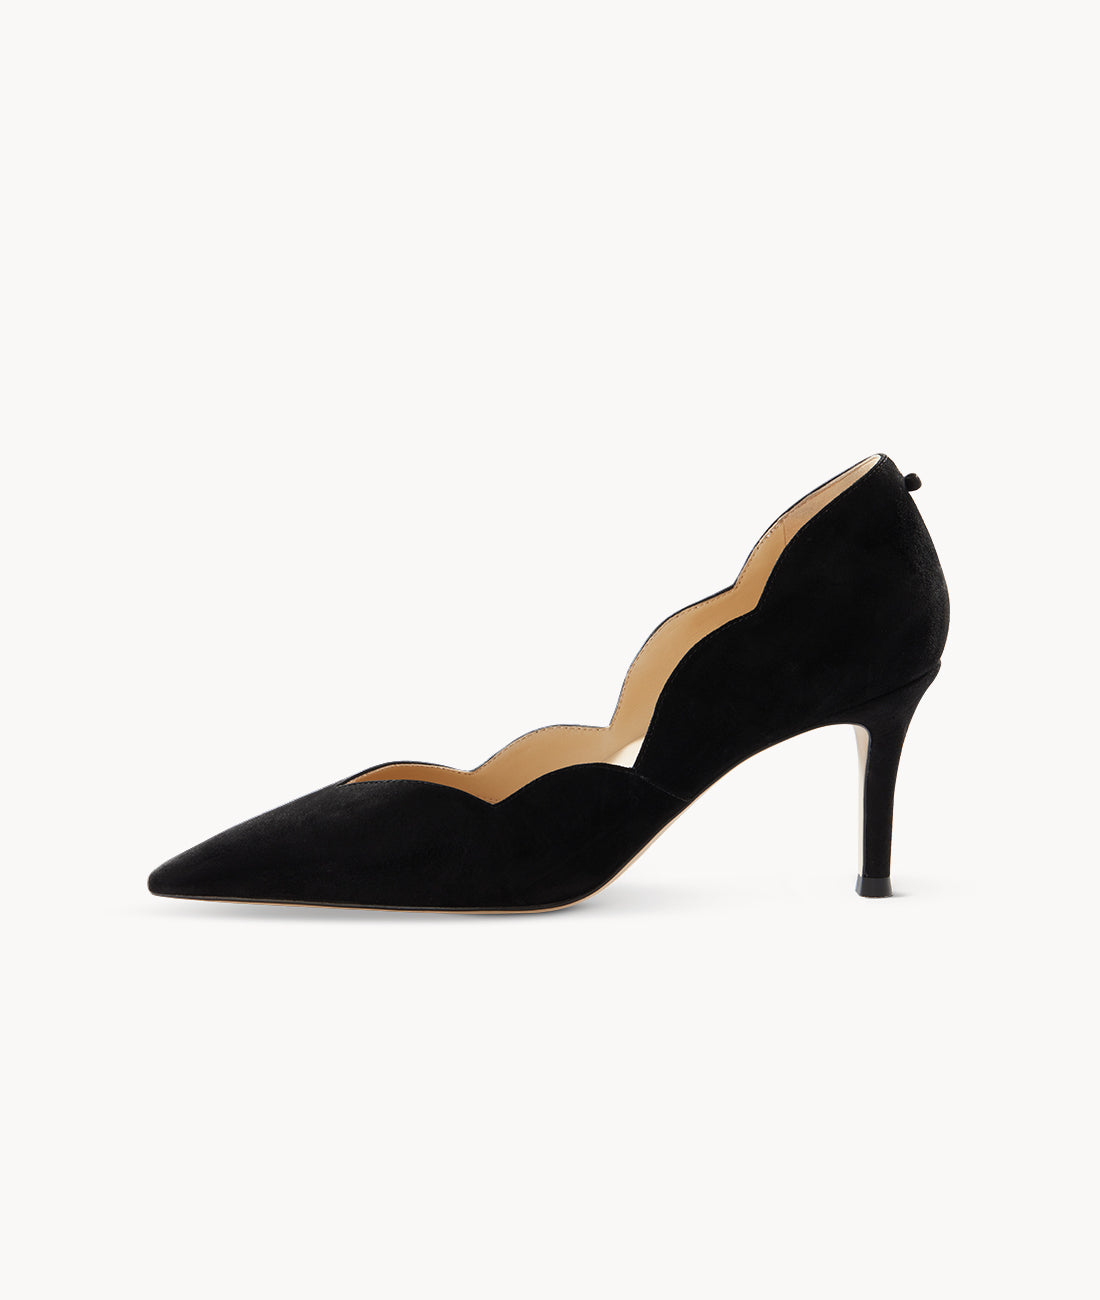 Black Suede close toed pointed toe heels